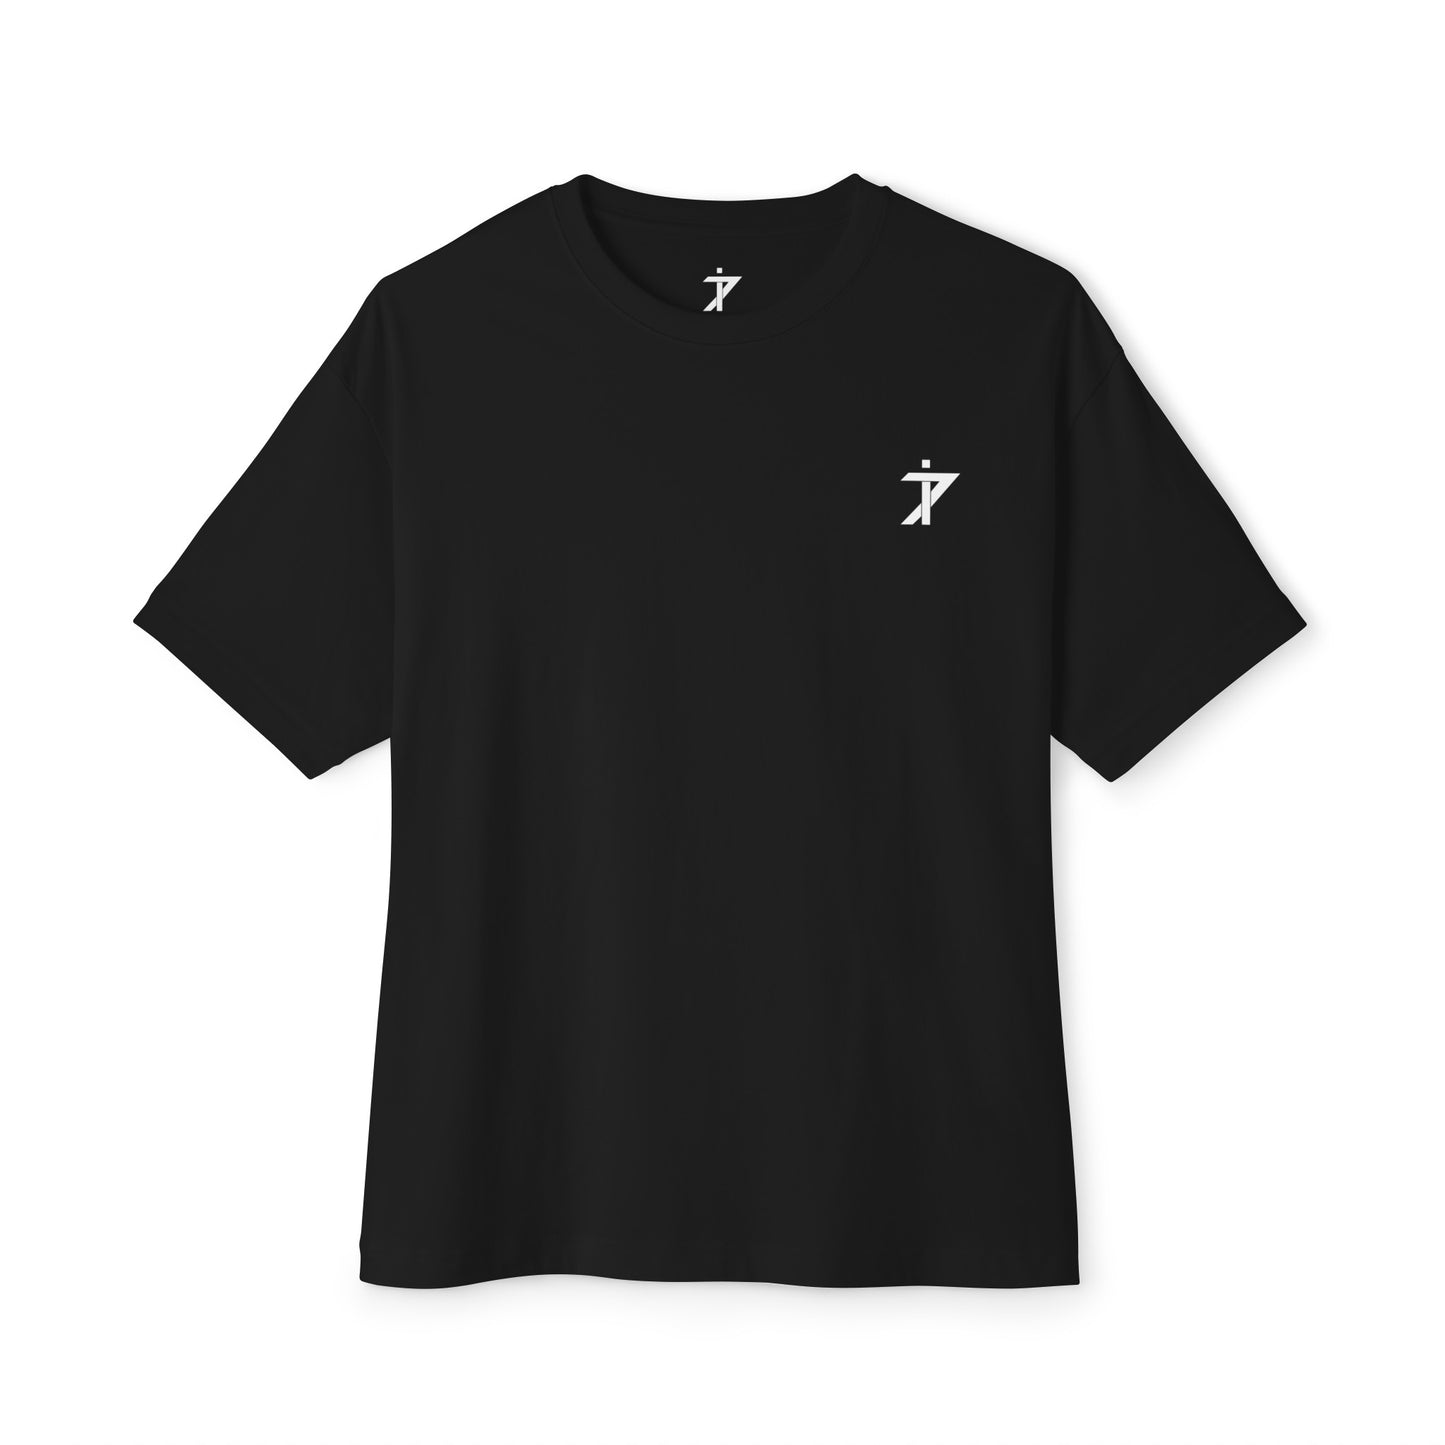 Limited Edition First Drop Oversize i7 Brand T shirt